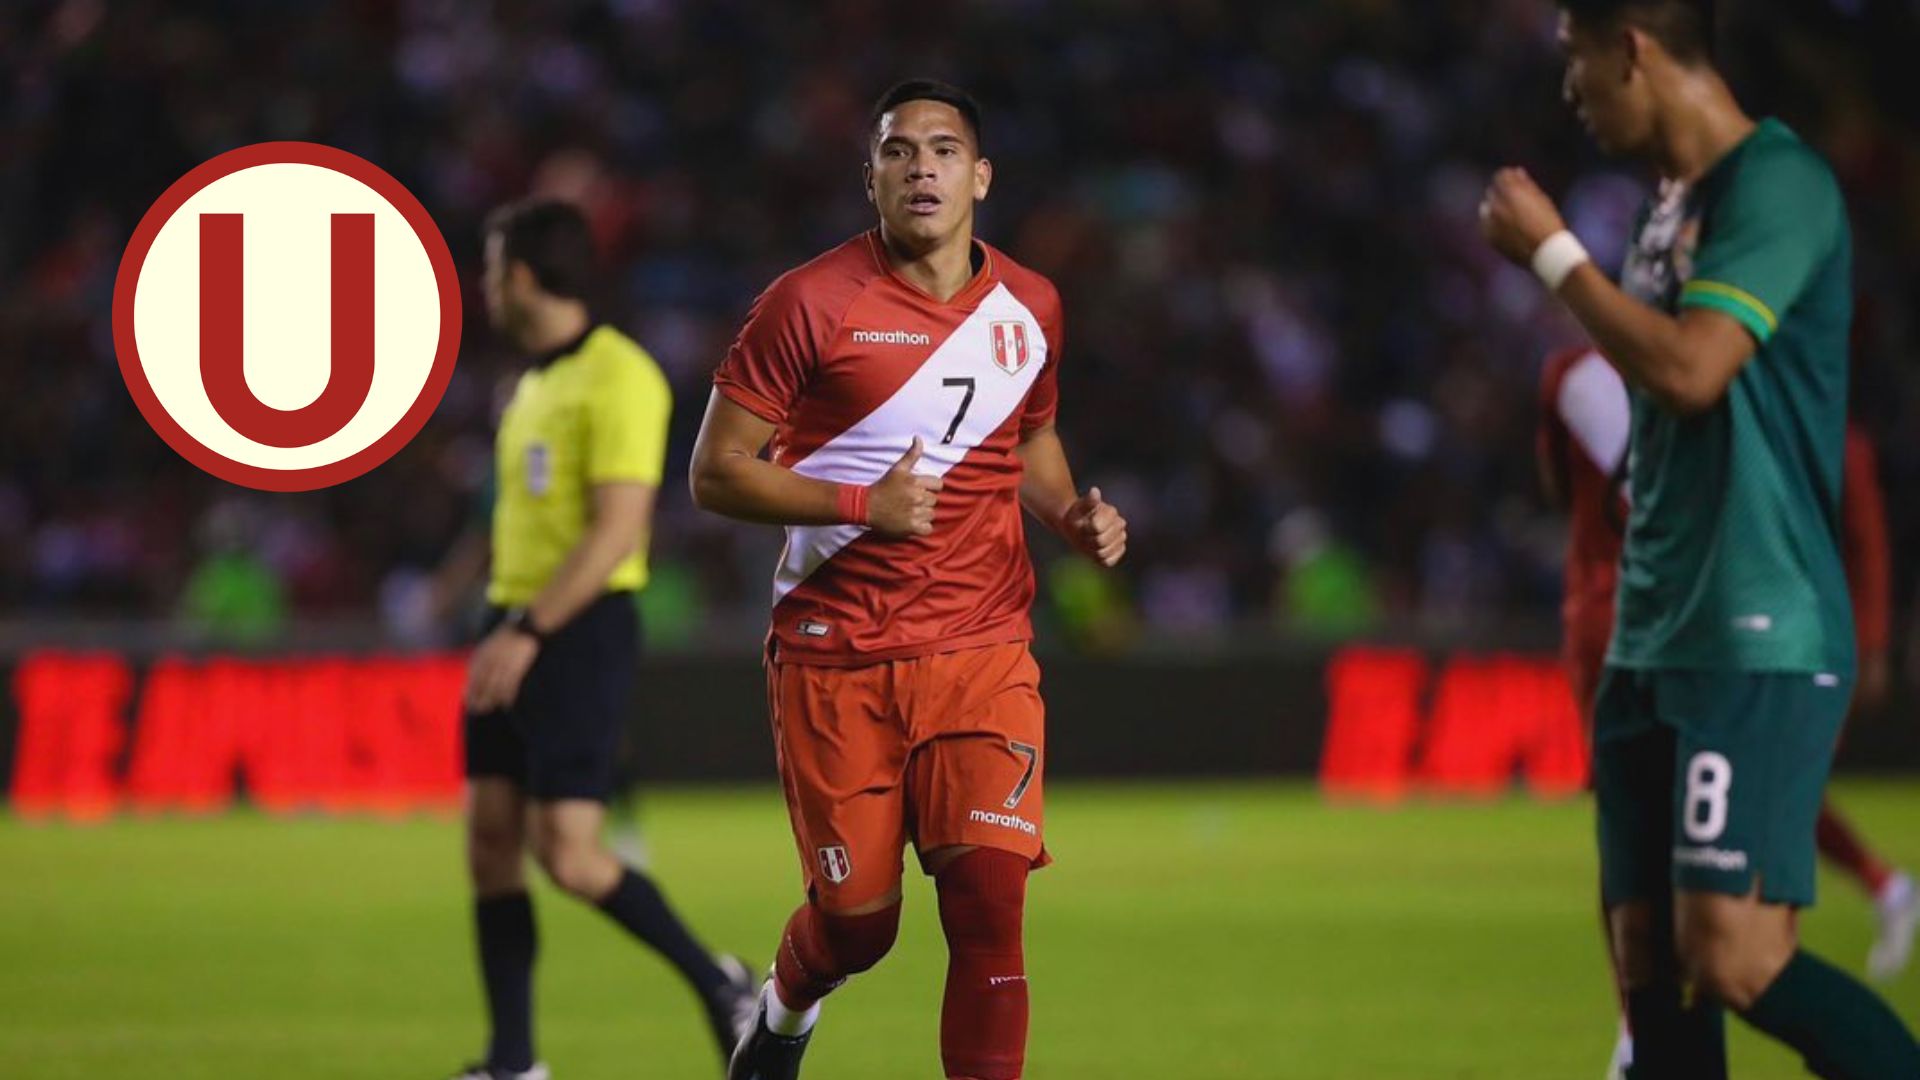 The Peruvian midfielder will be transferred by Hull City to the 'creams'.